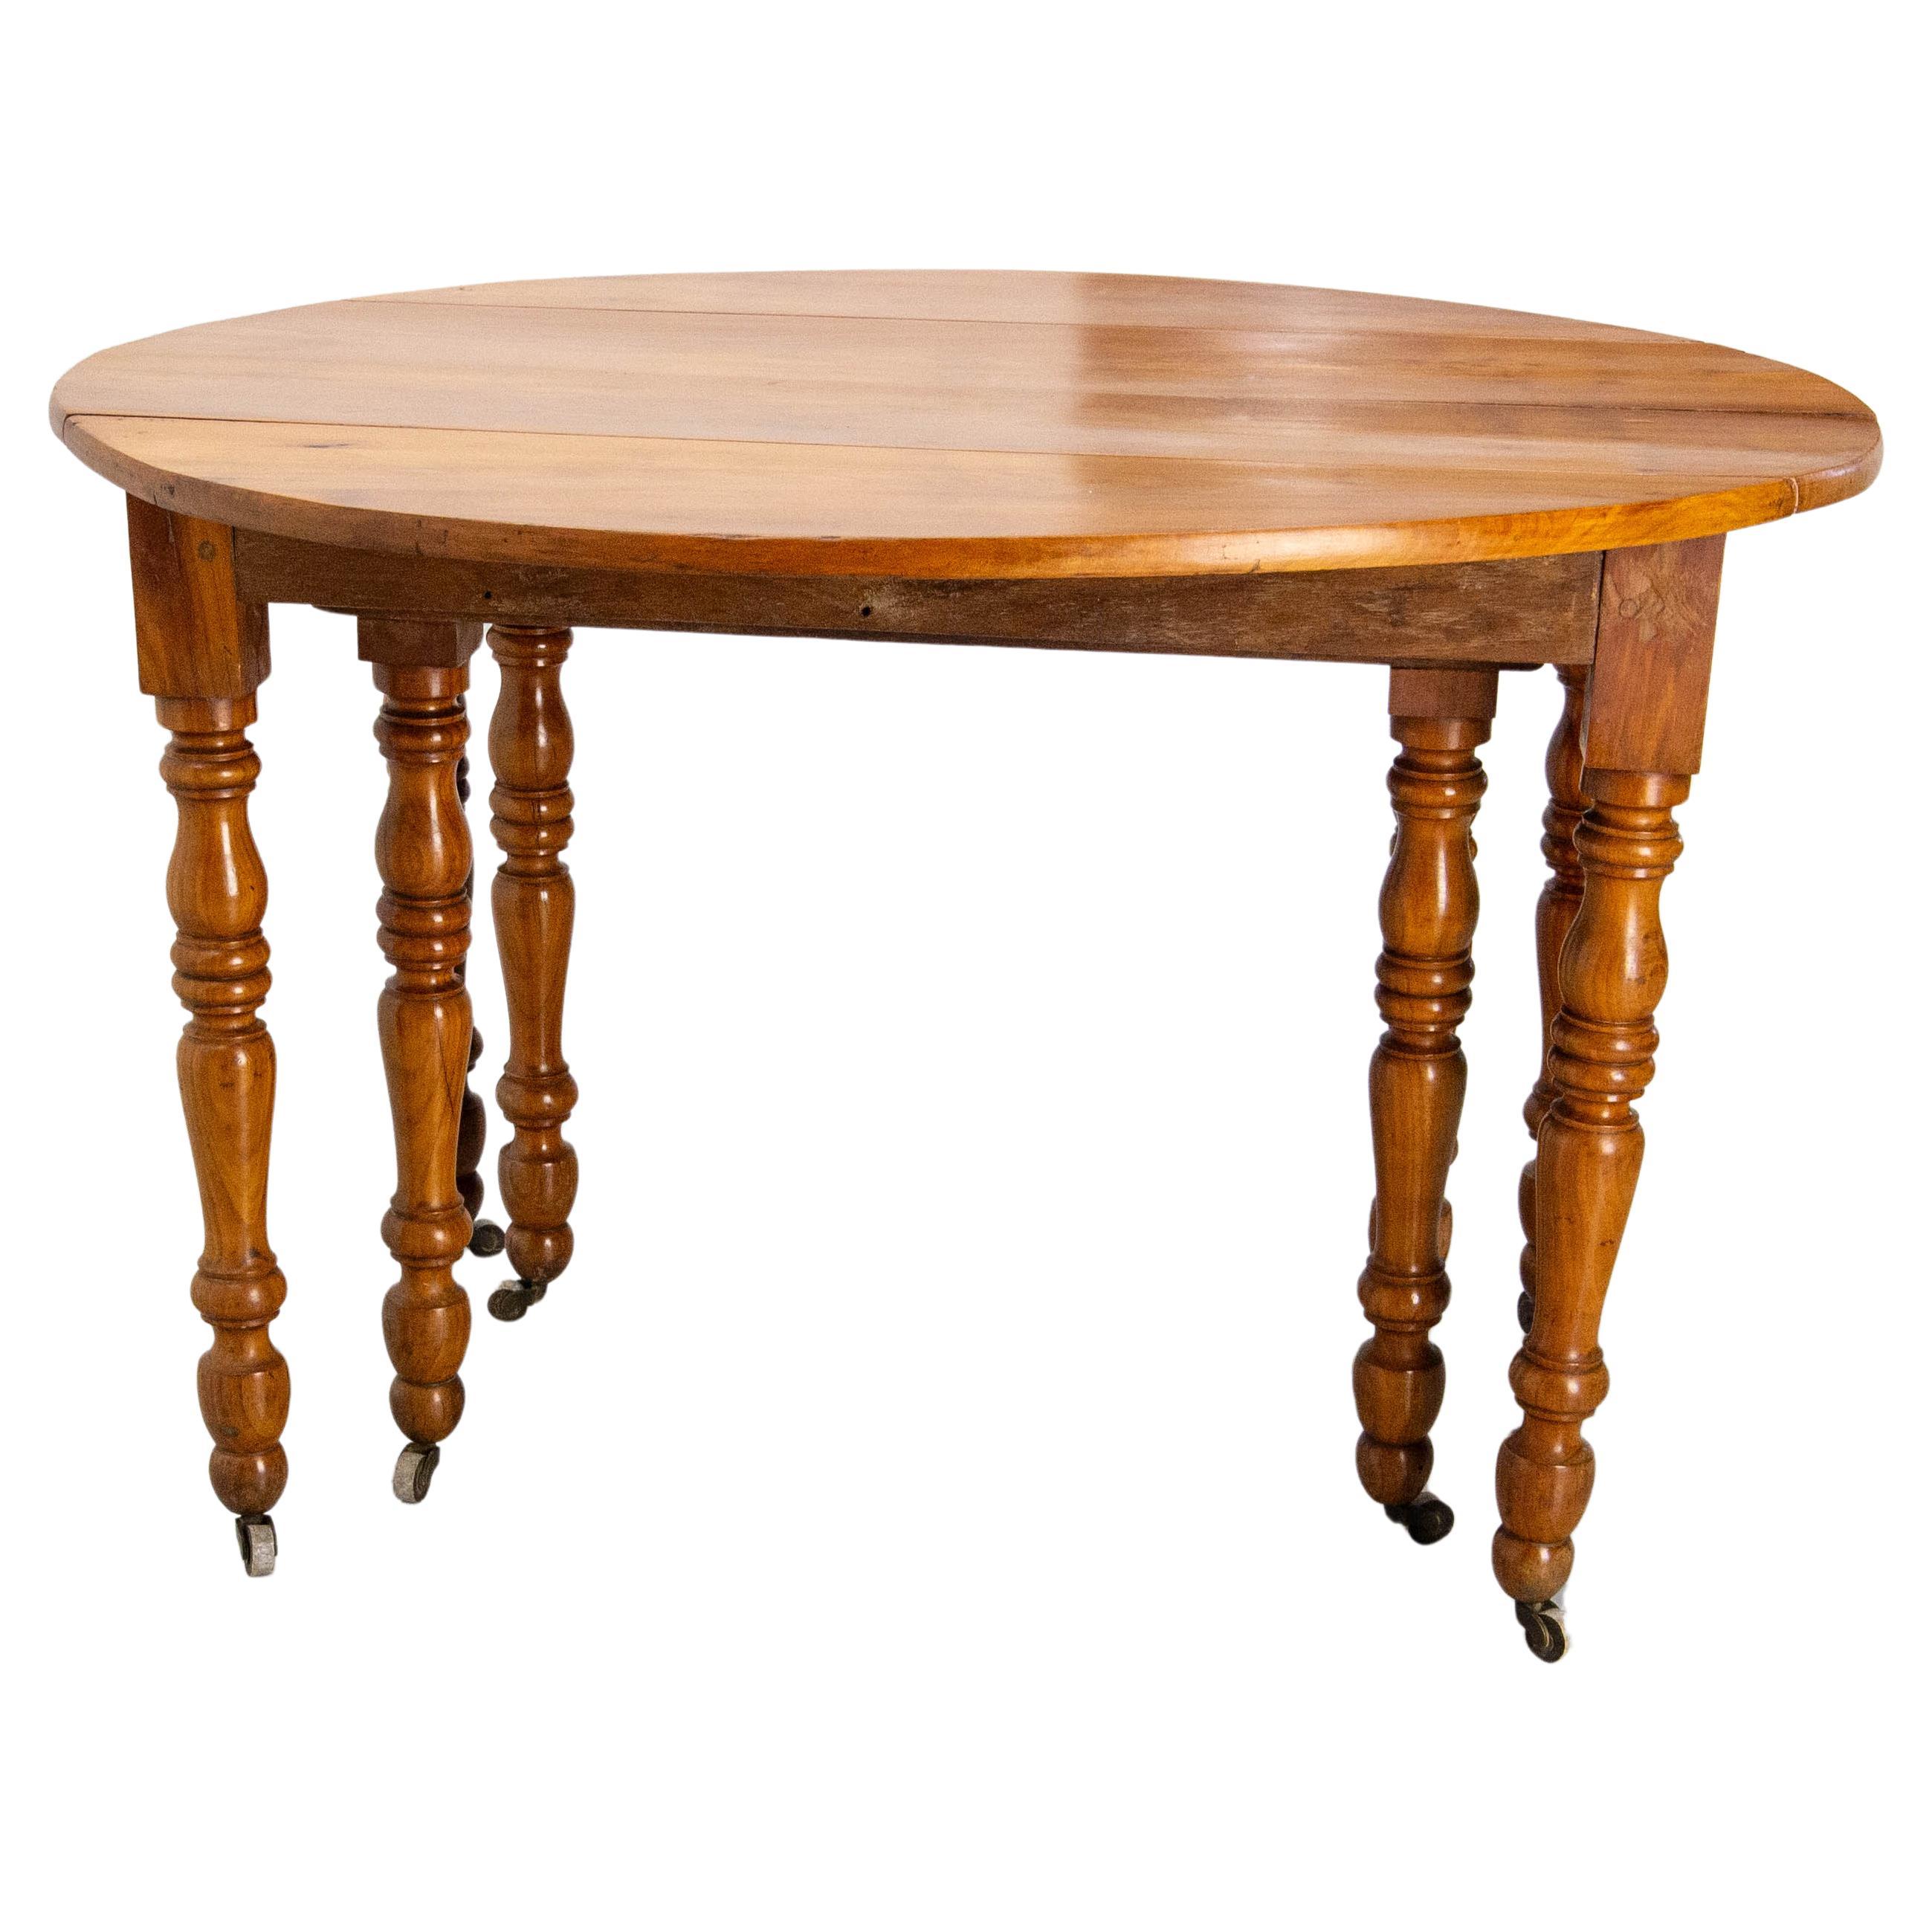 French Cherrywood Dining Extending Table Louis Philippe Period, Mid 19th C